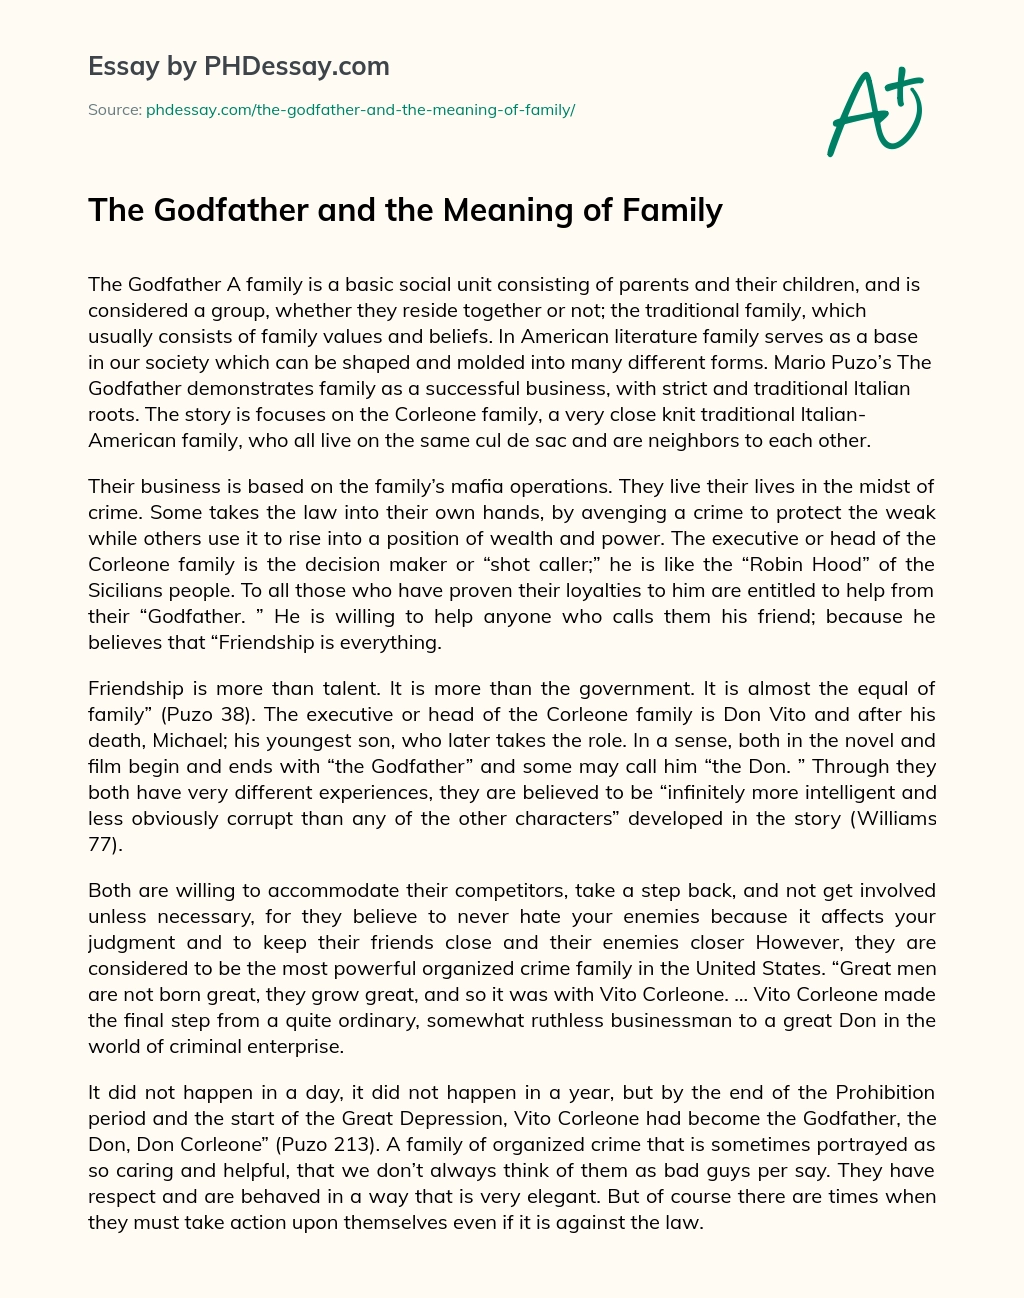 The Godfather and the Meaning of Family essay